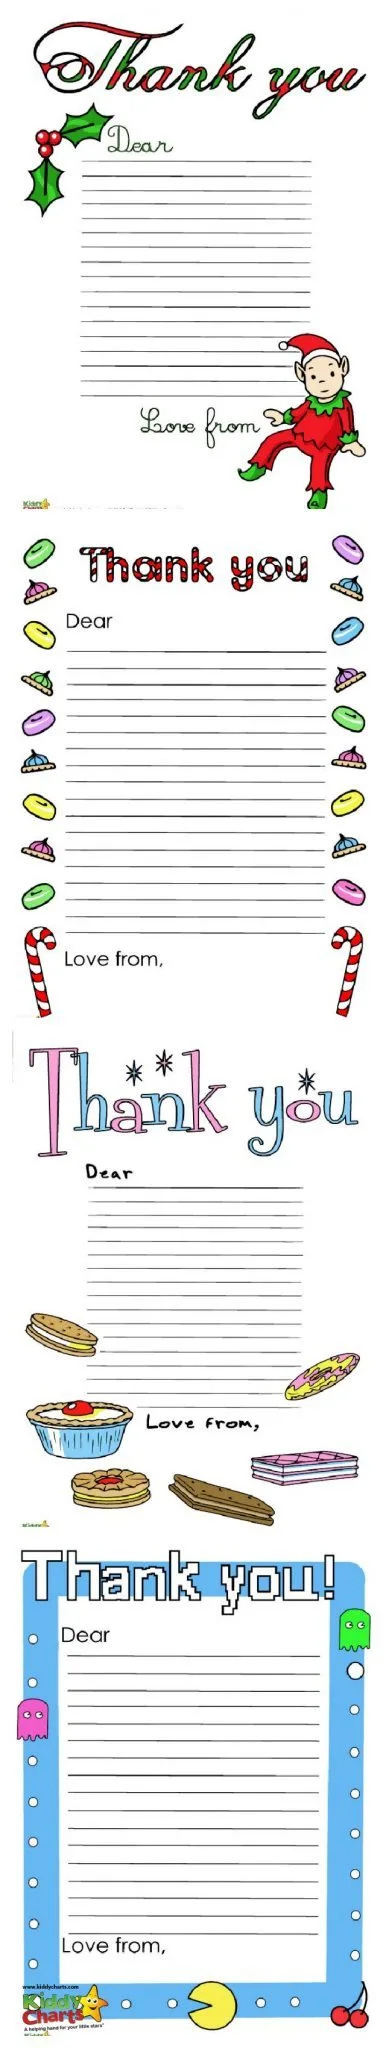 Thank you letters are an important part of birthdays and Christmas. Kids need to learn that thank you is a wonderful way to show their appreciation of what people have dome for them. Thank you letters are a tradition at Christmas and birthdays in our house; so here are a few free thank you letters to help you out too!